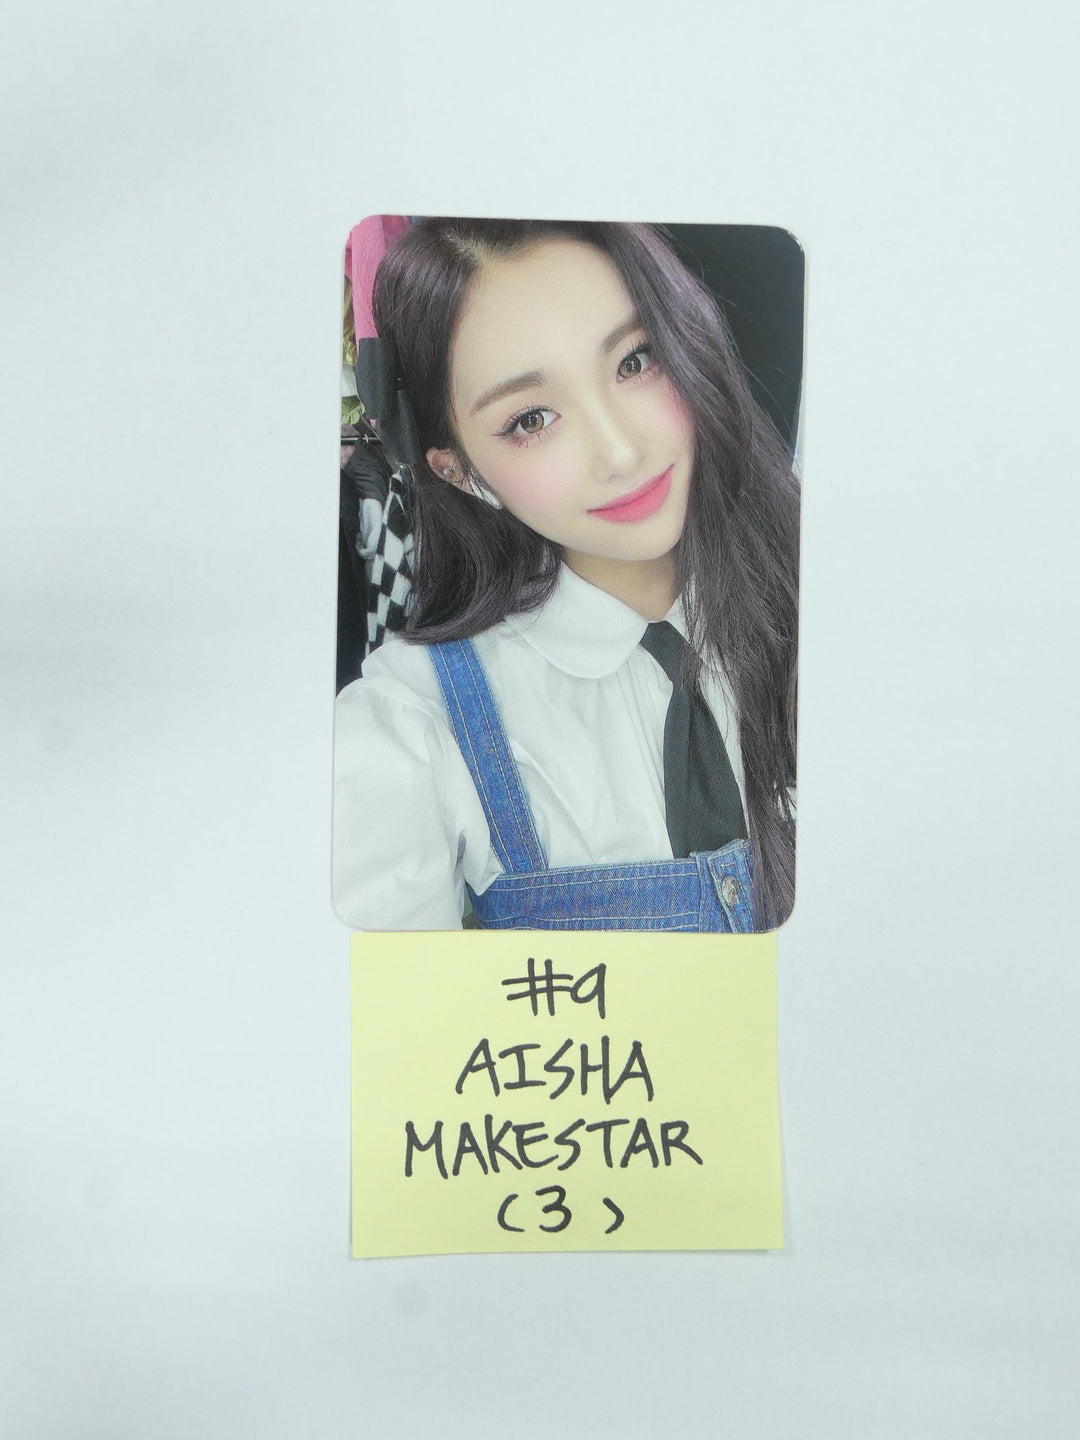 Everglow 'Return of The Girl' - Makestar Fansign Event Photocard